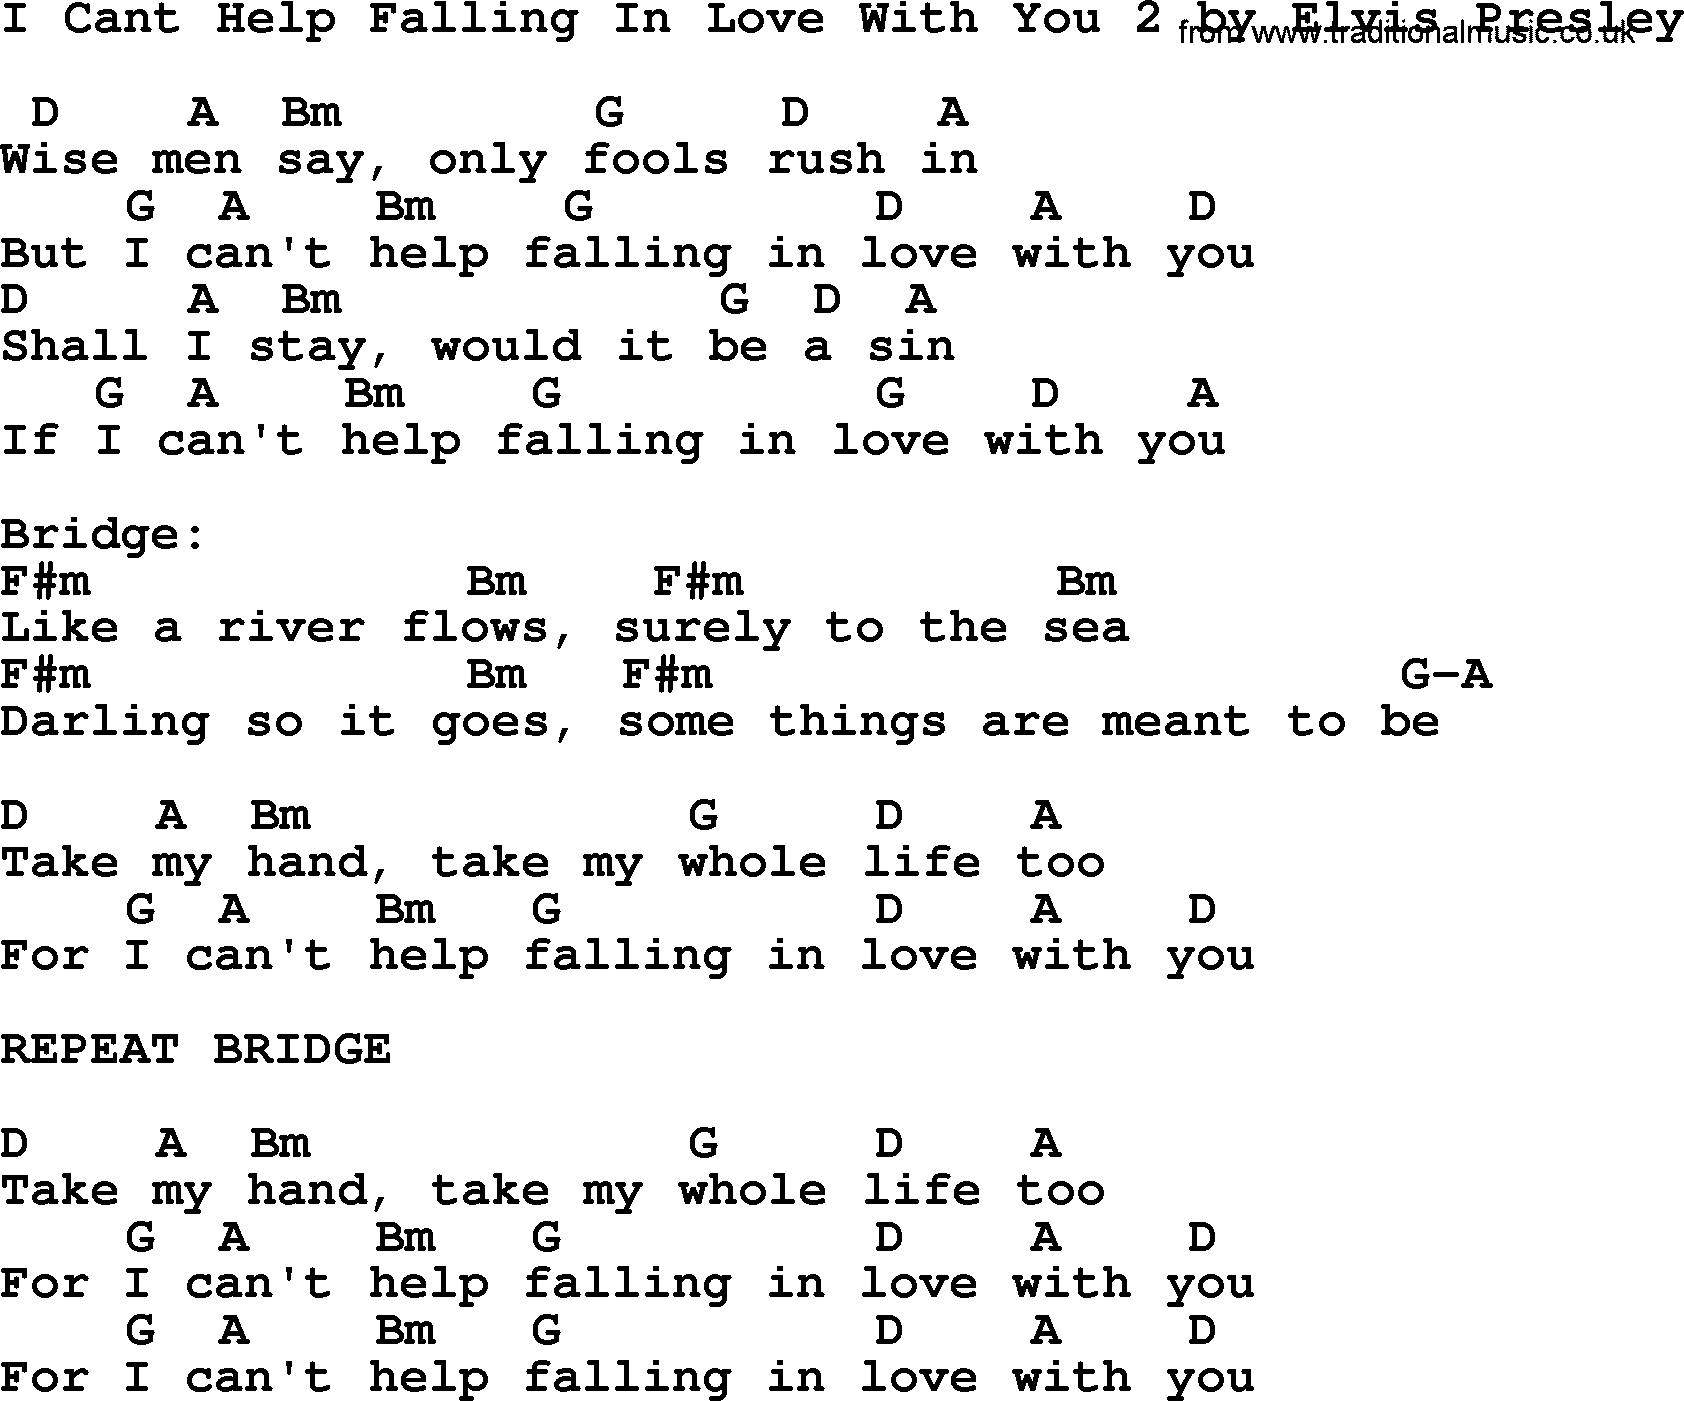 I Can T Help Falling In Love With You Chords I Cant Help Falling In Love With You 2 Elvis Presley Lyrics